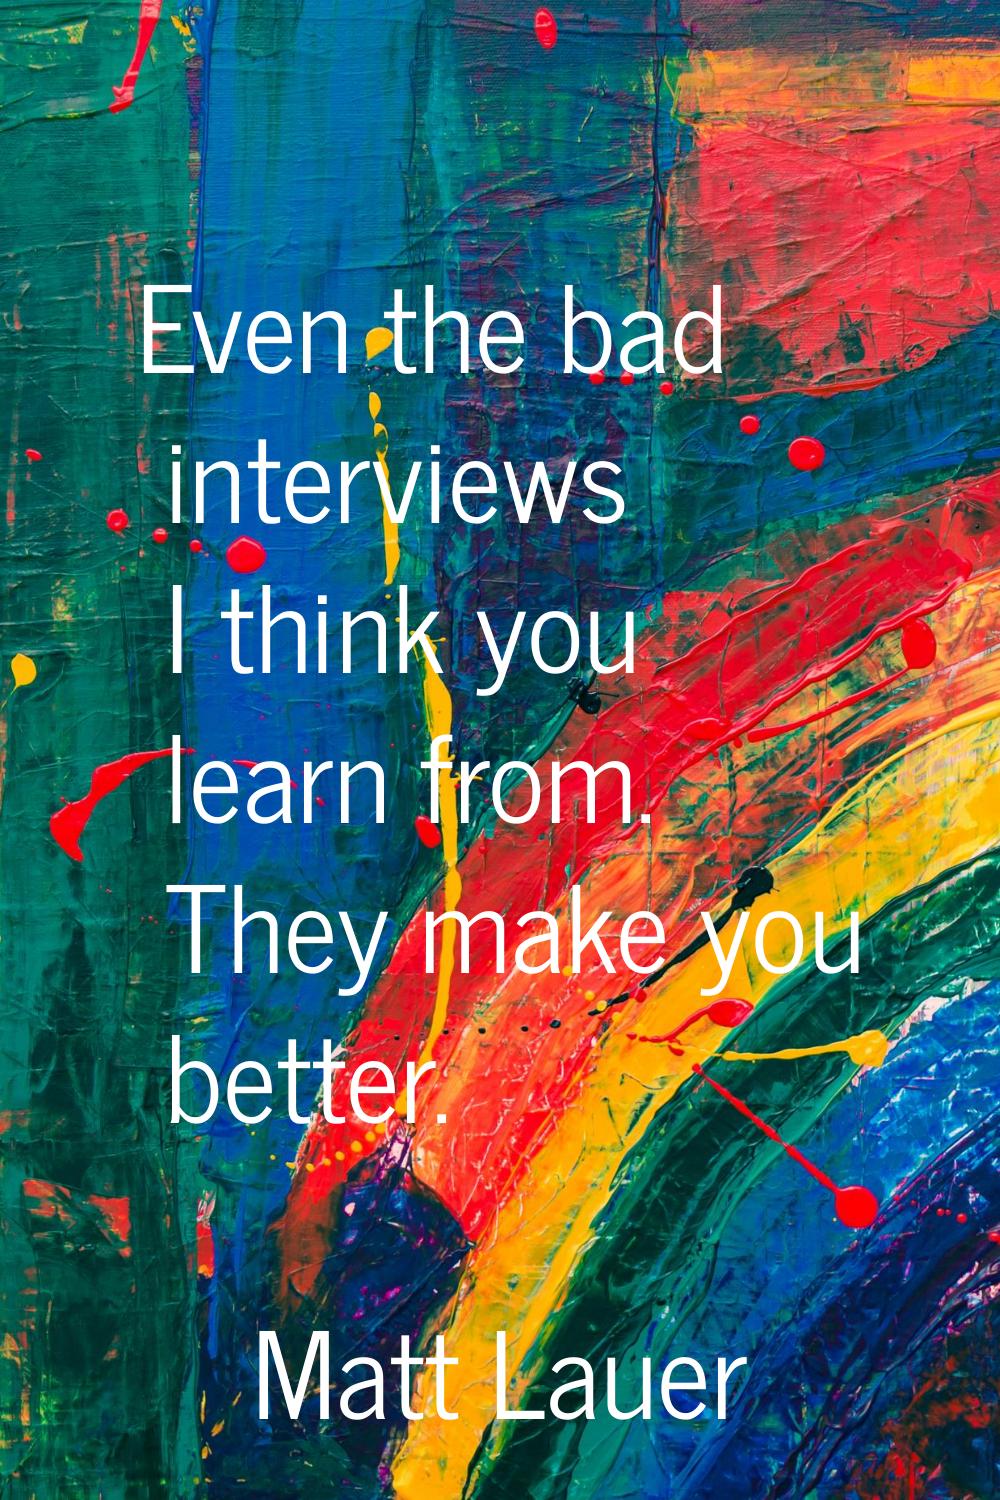 Even the bad interviews I think you learn from. They make you better.